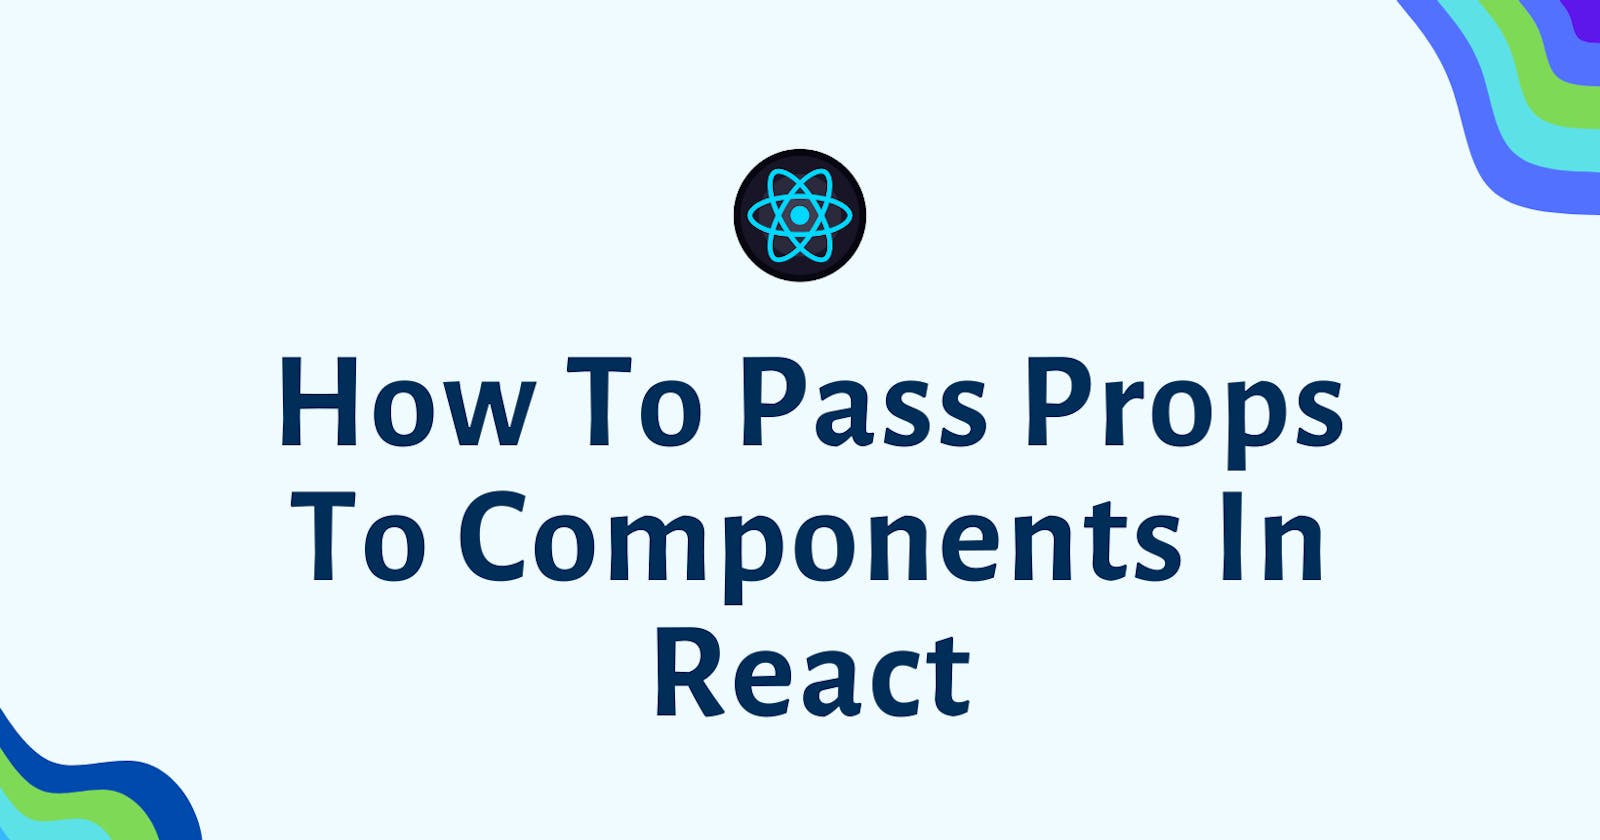 How To Pass Props To Components In React